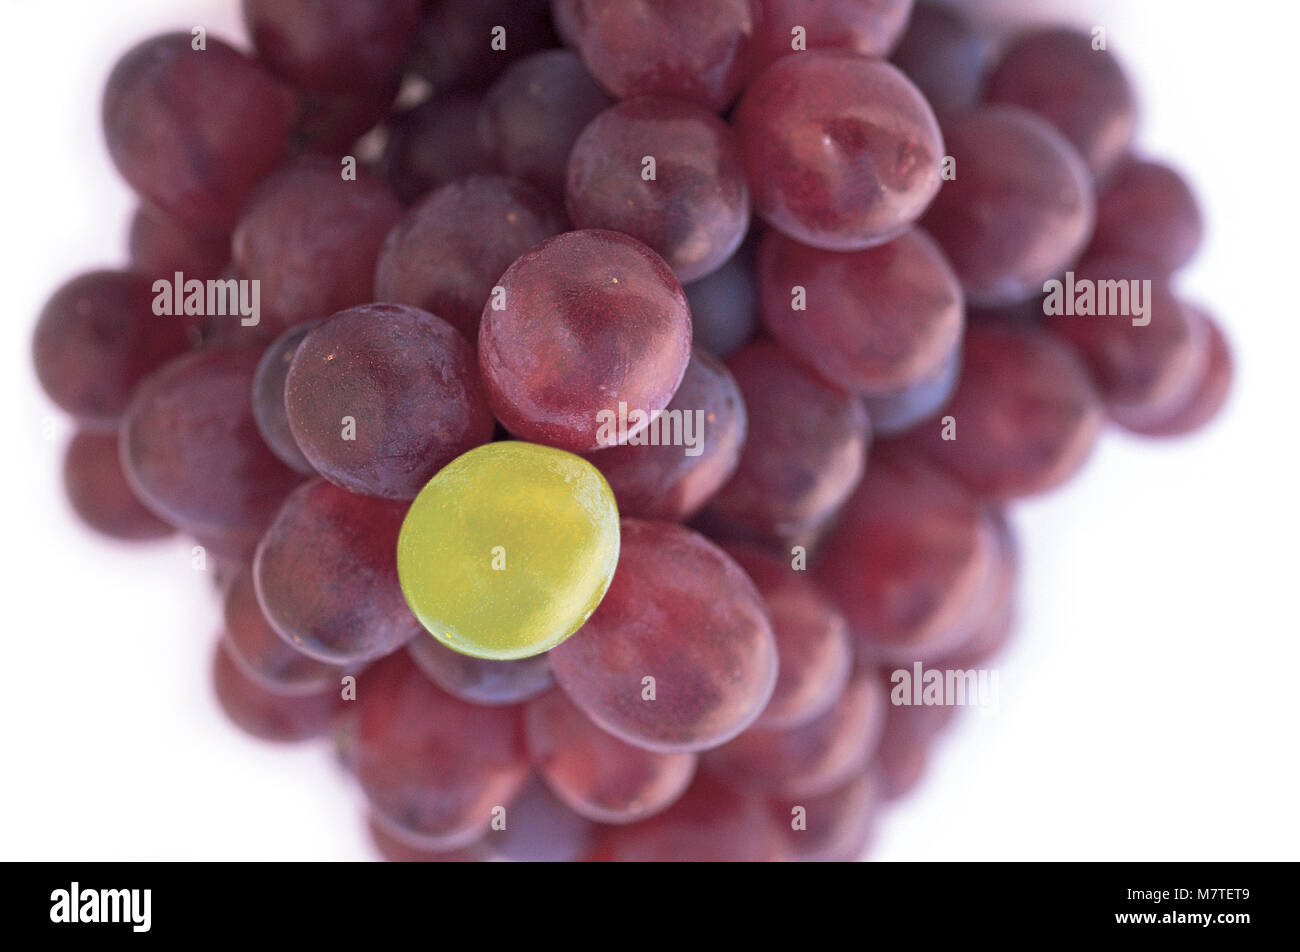 Close-up of one green grape sticking out in a bunch of red grapes. Stock Photo